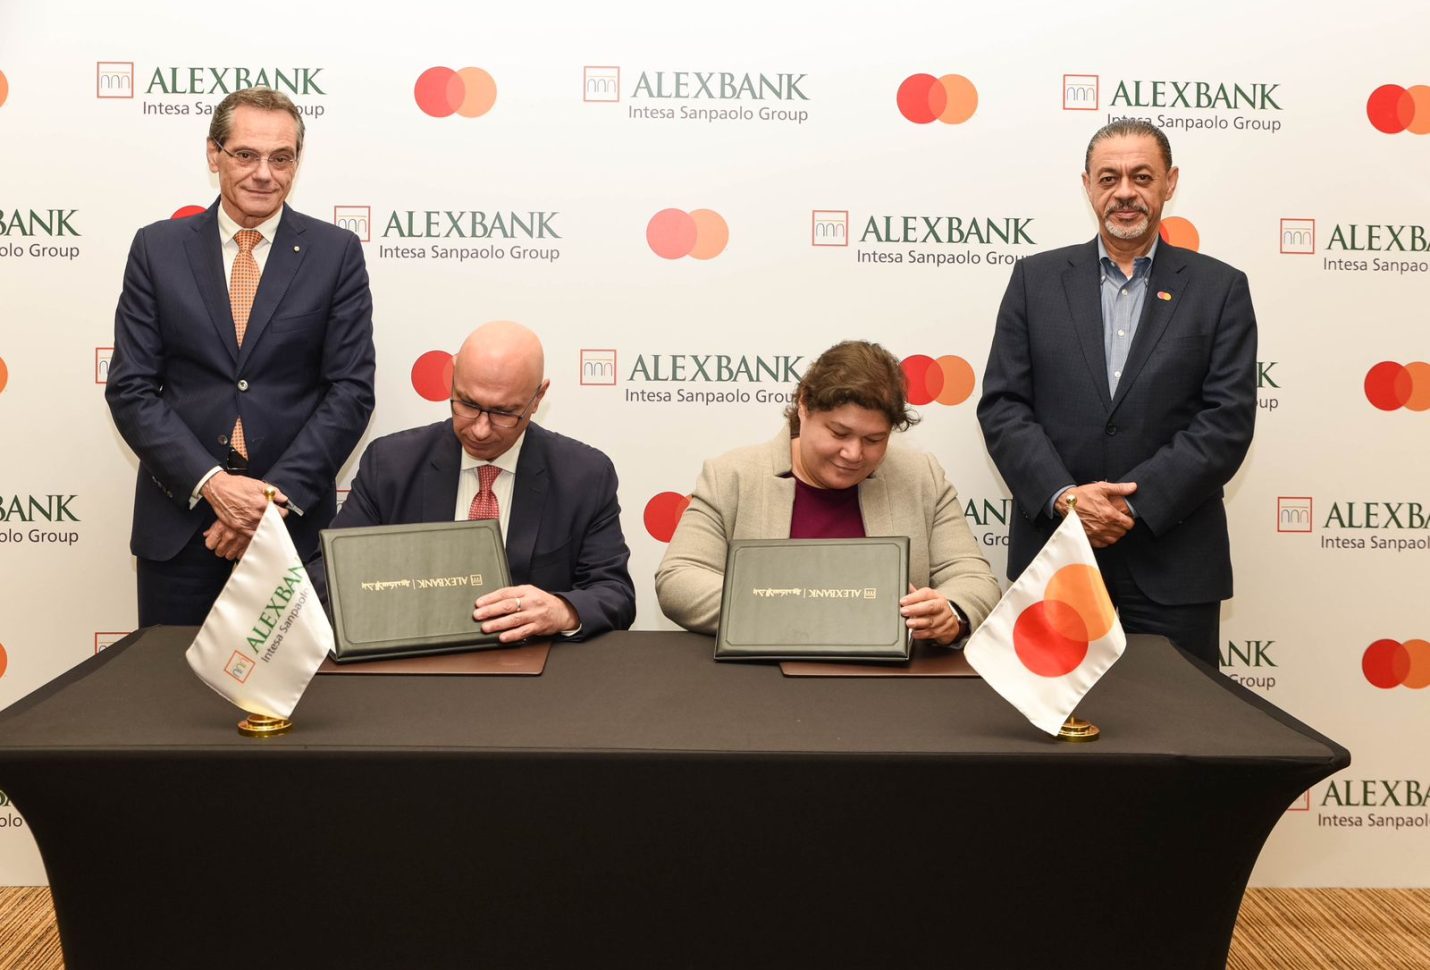 Mastercard, ALEXBANK team up to promote financial inclusion